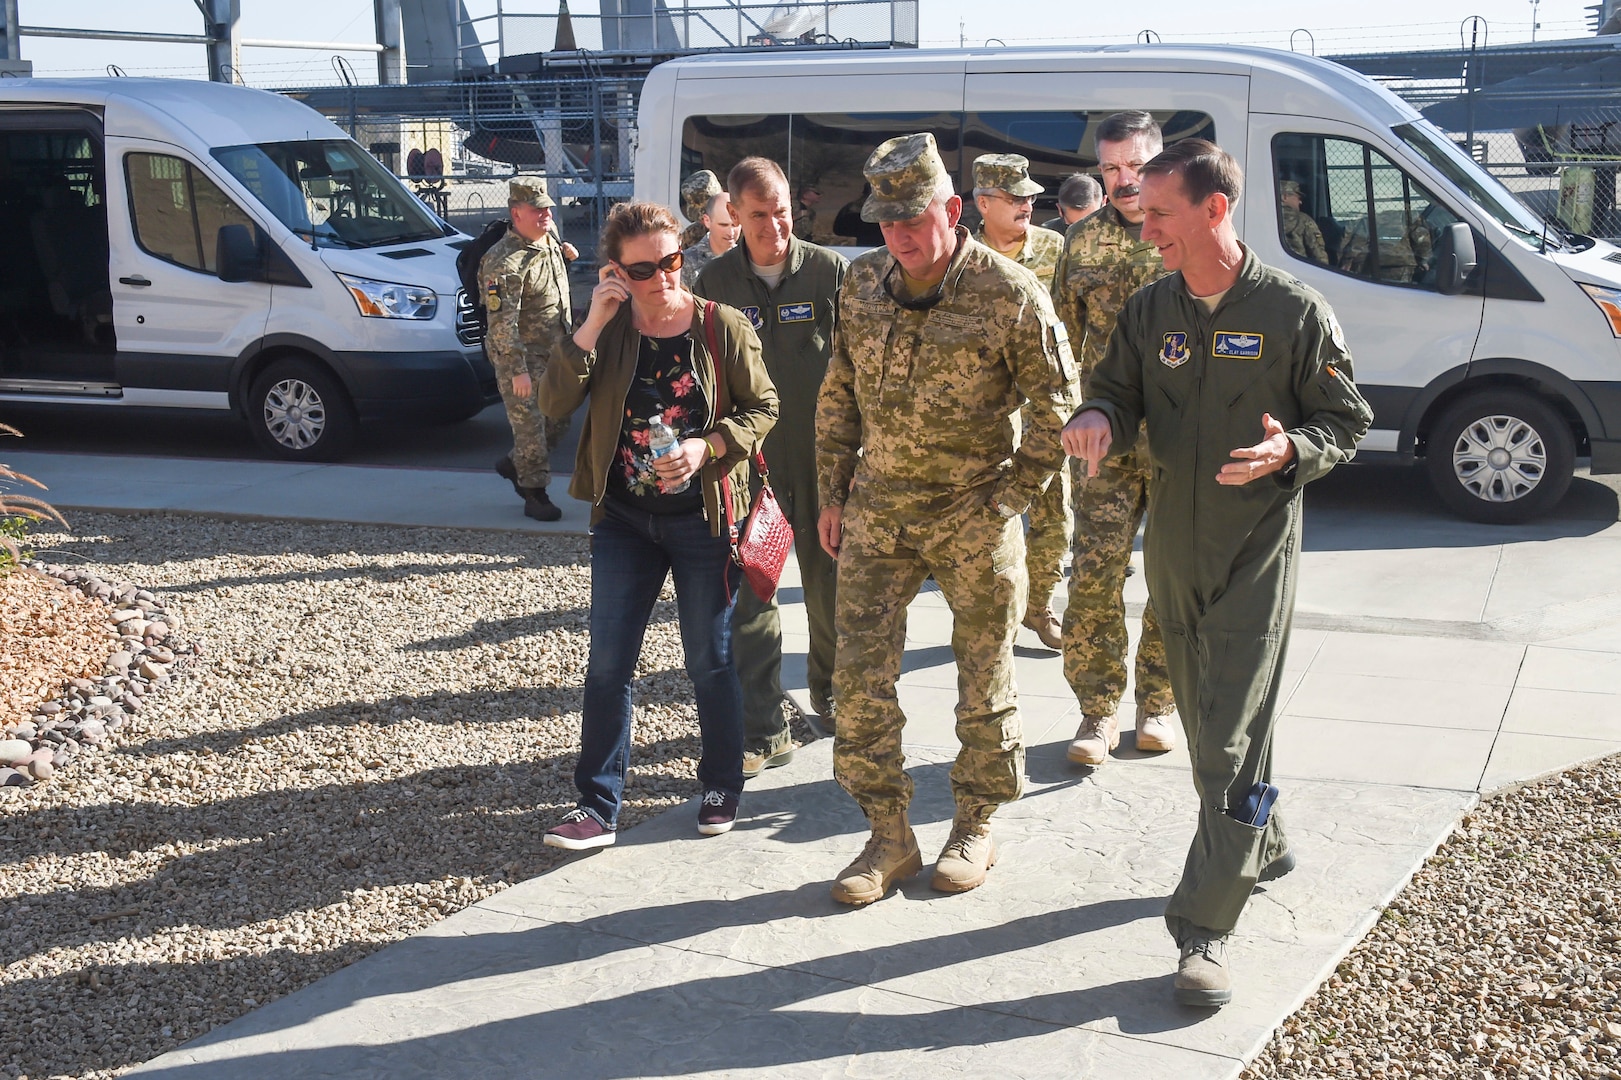 U.S. Air Force Brig. Gen. Clay Garrison, California Air National Guard commander, discusses operations with Ukraine General Viktor Muzhenko, Chief of the General Staff of the Armed Forces of Ukraine, while walking to the operations building for the first briefing during their State Partnership Program visit to the 144th Fighter Wing Oct. 26, 2017. The purpose of the SPP is to enhance military ties and strengthen partnerships with nations around the world.